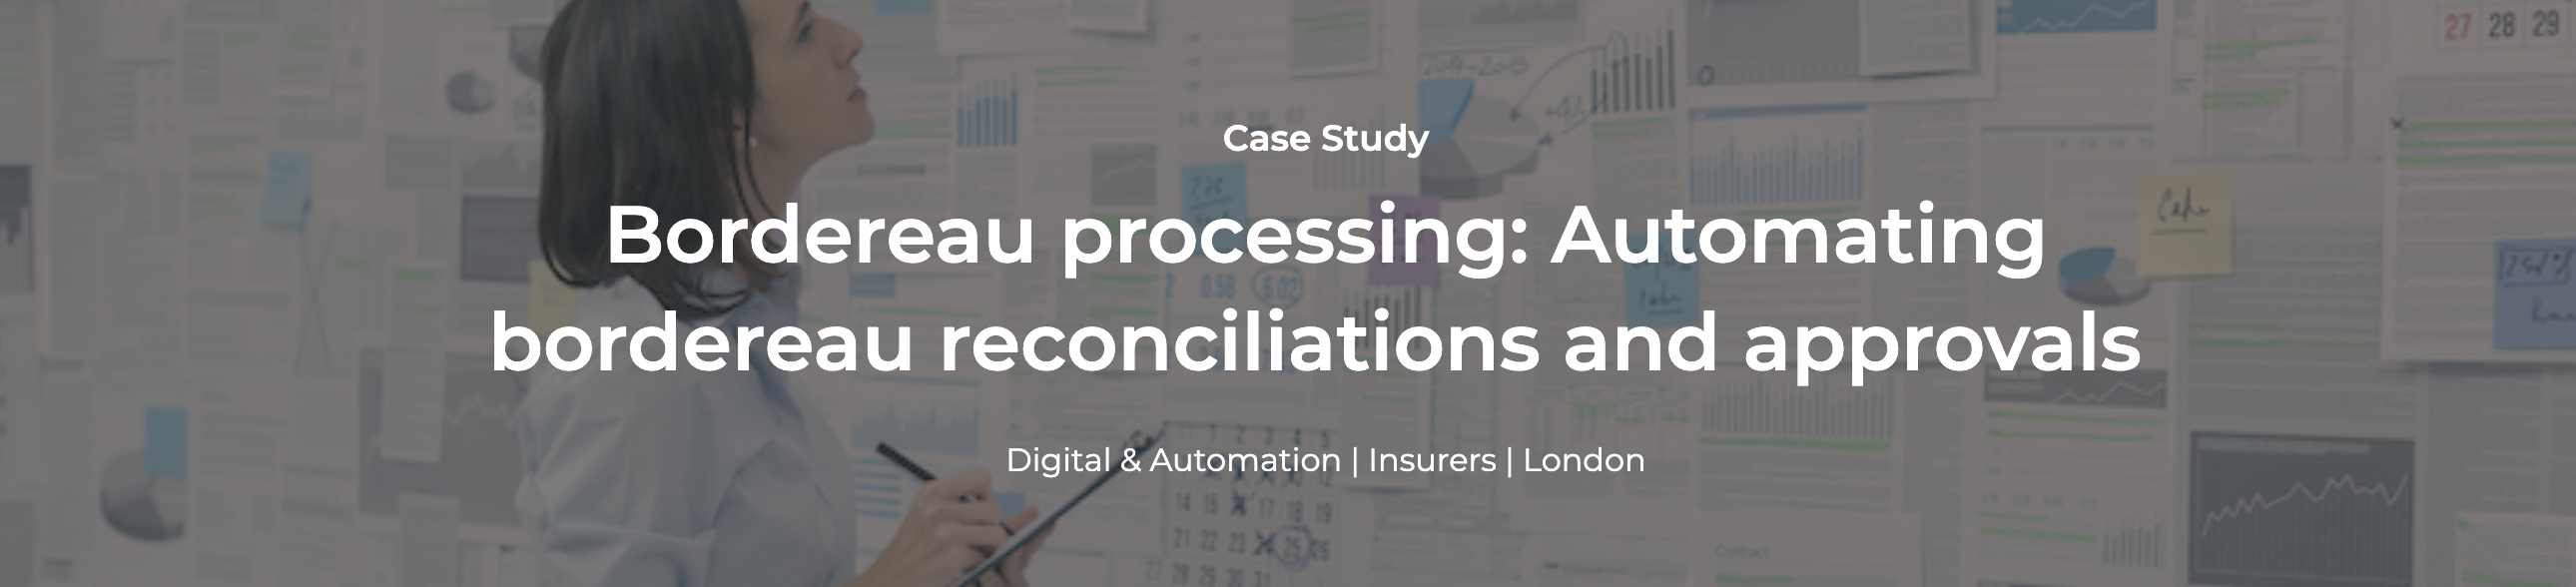 Digital Case Study: Automating bordereau reconciliations and approvals